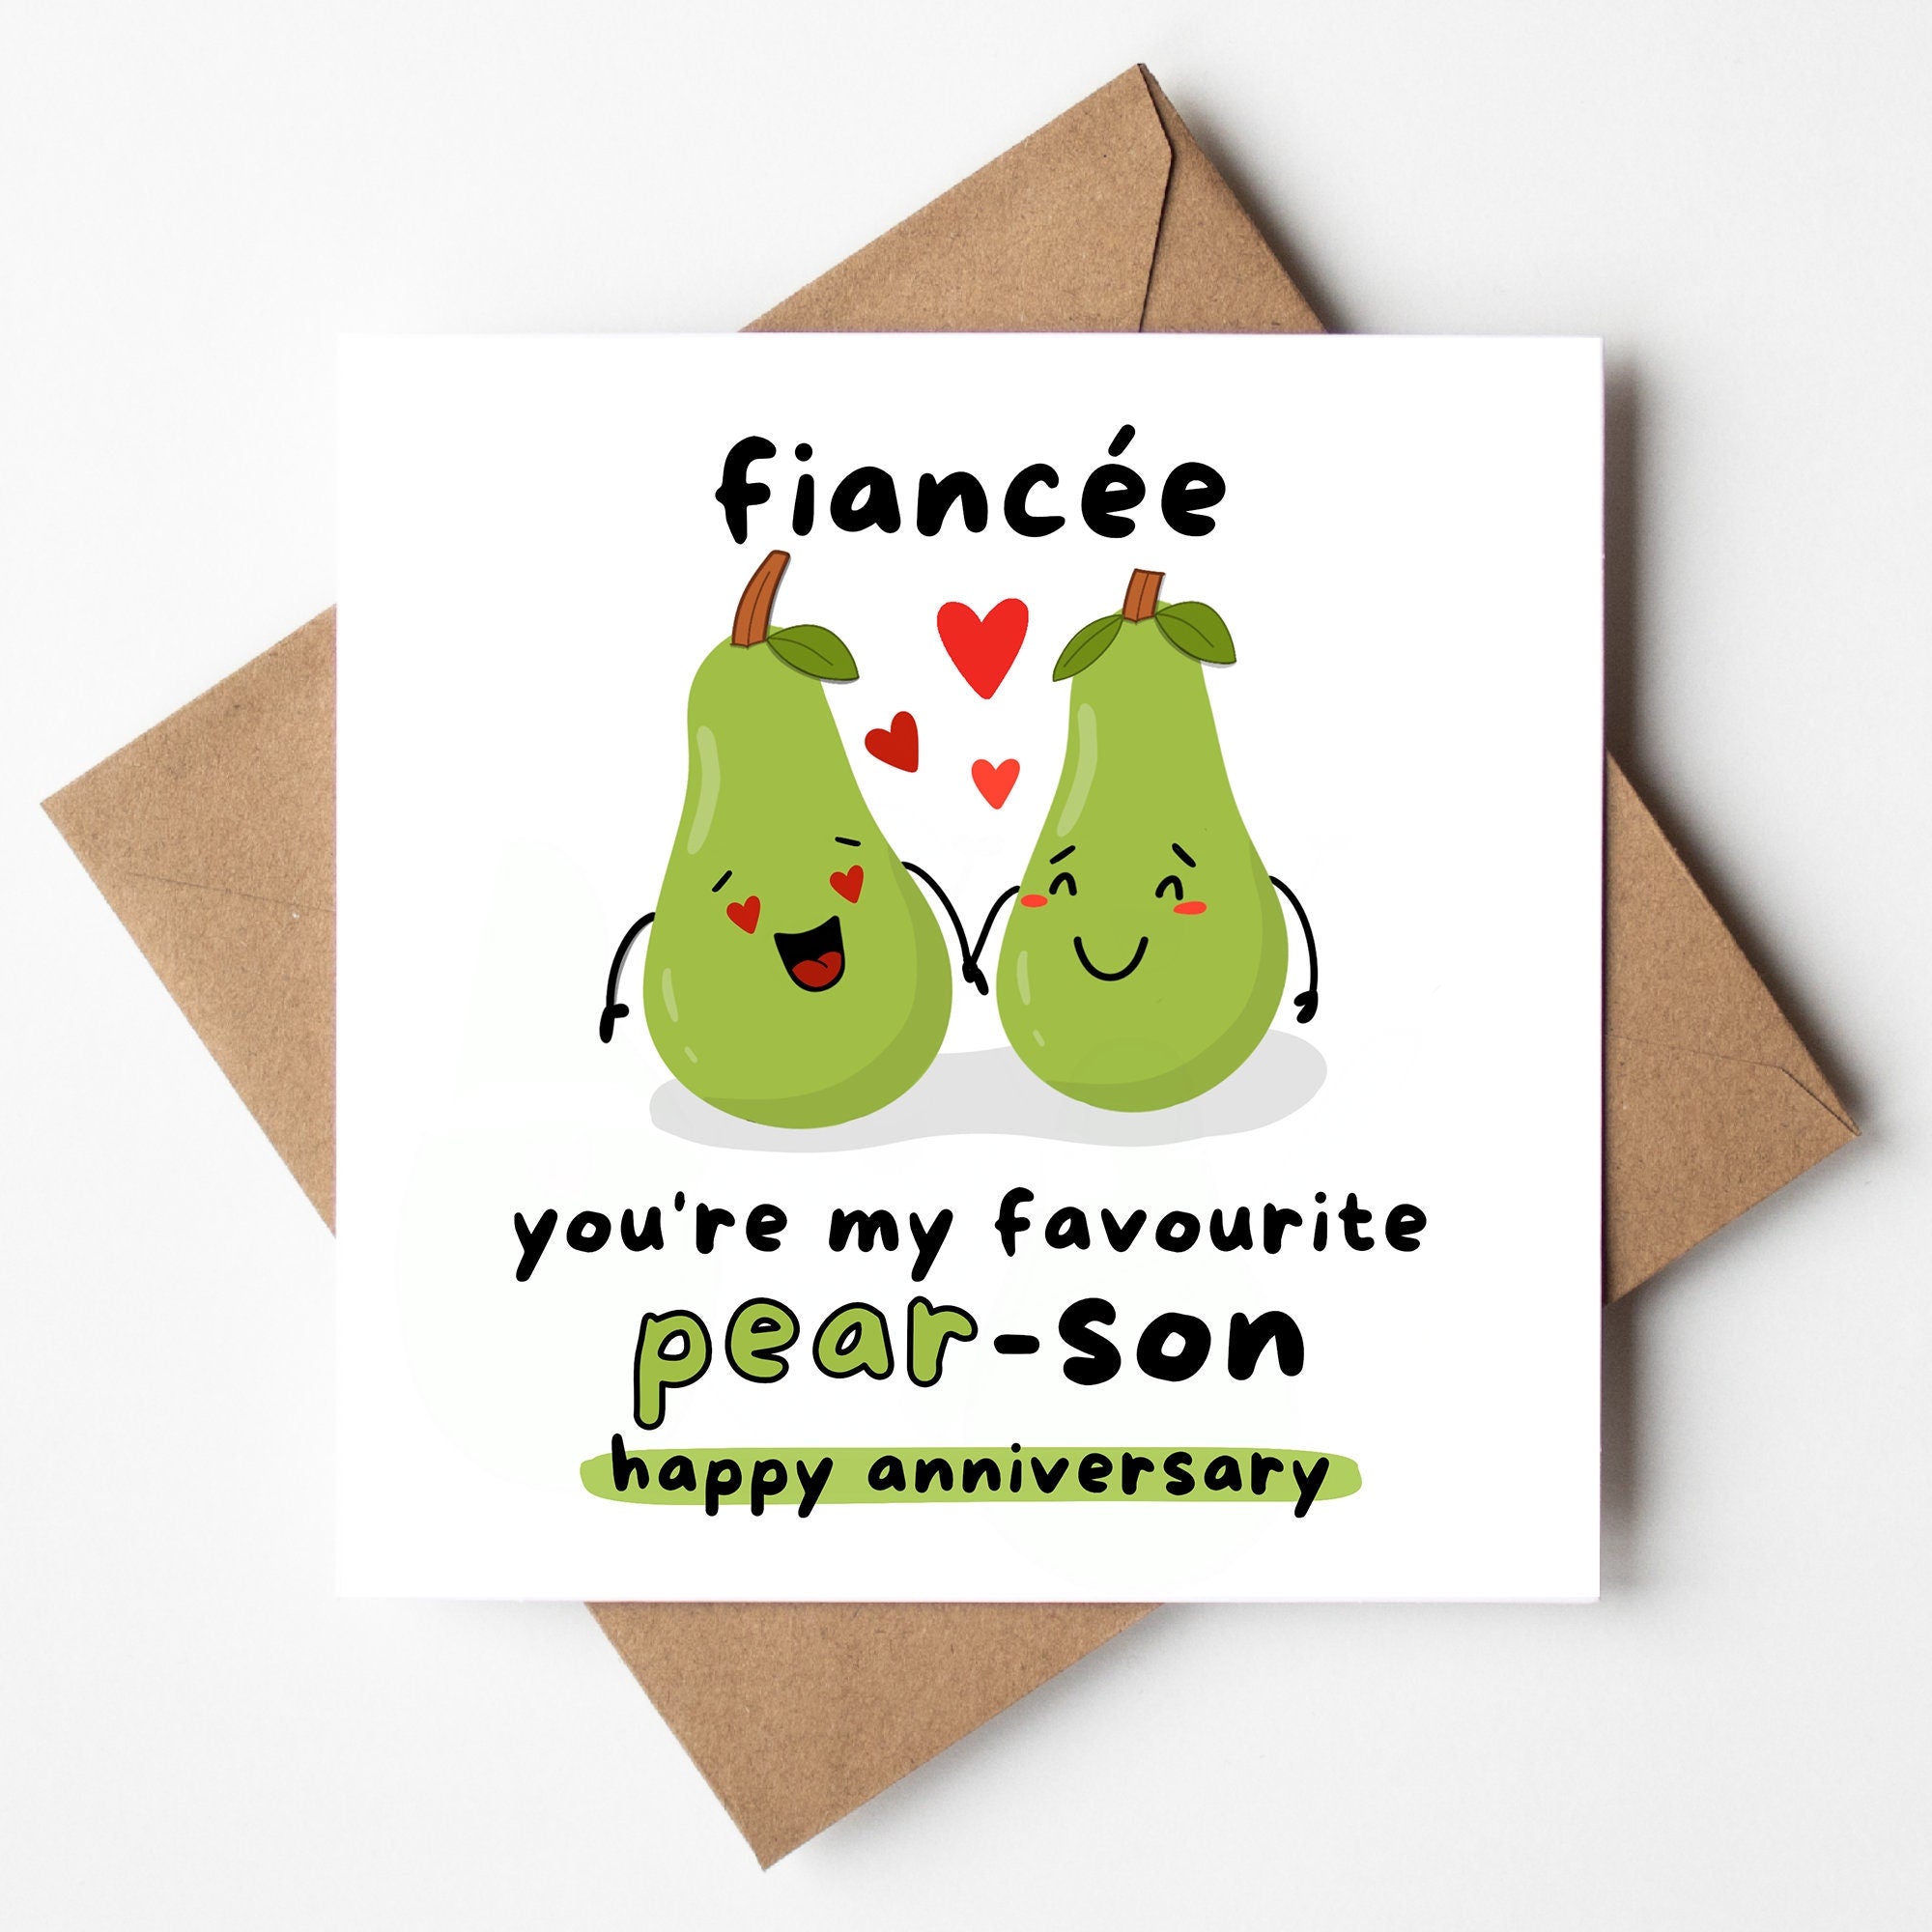 Fiancée You're My Favourite Pear-son, Best Wife Ever, From Husband, Anniversary Card, For Her, Wife To be, Girlfriend, Cute, Greeting Card